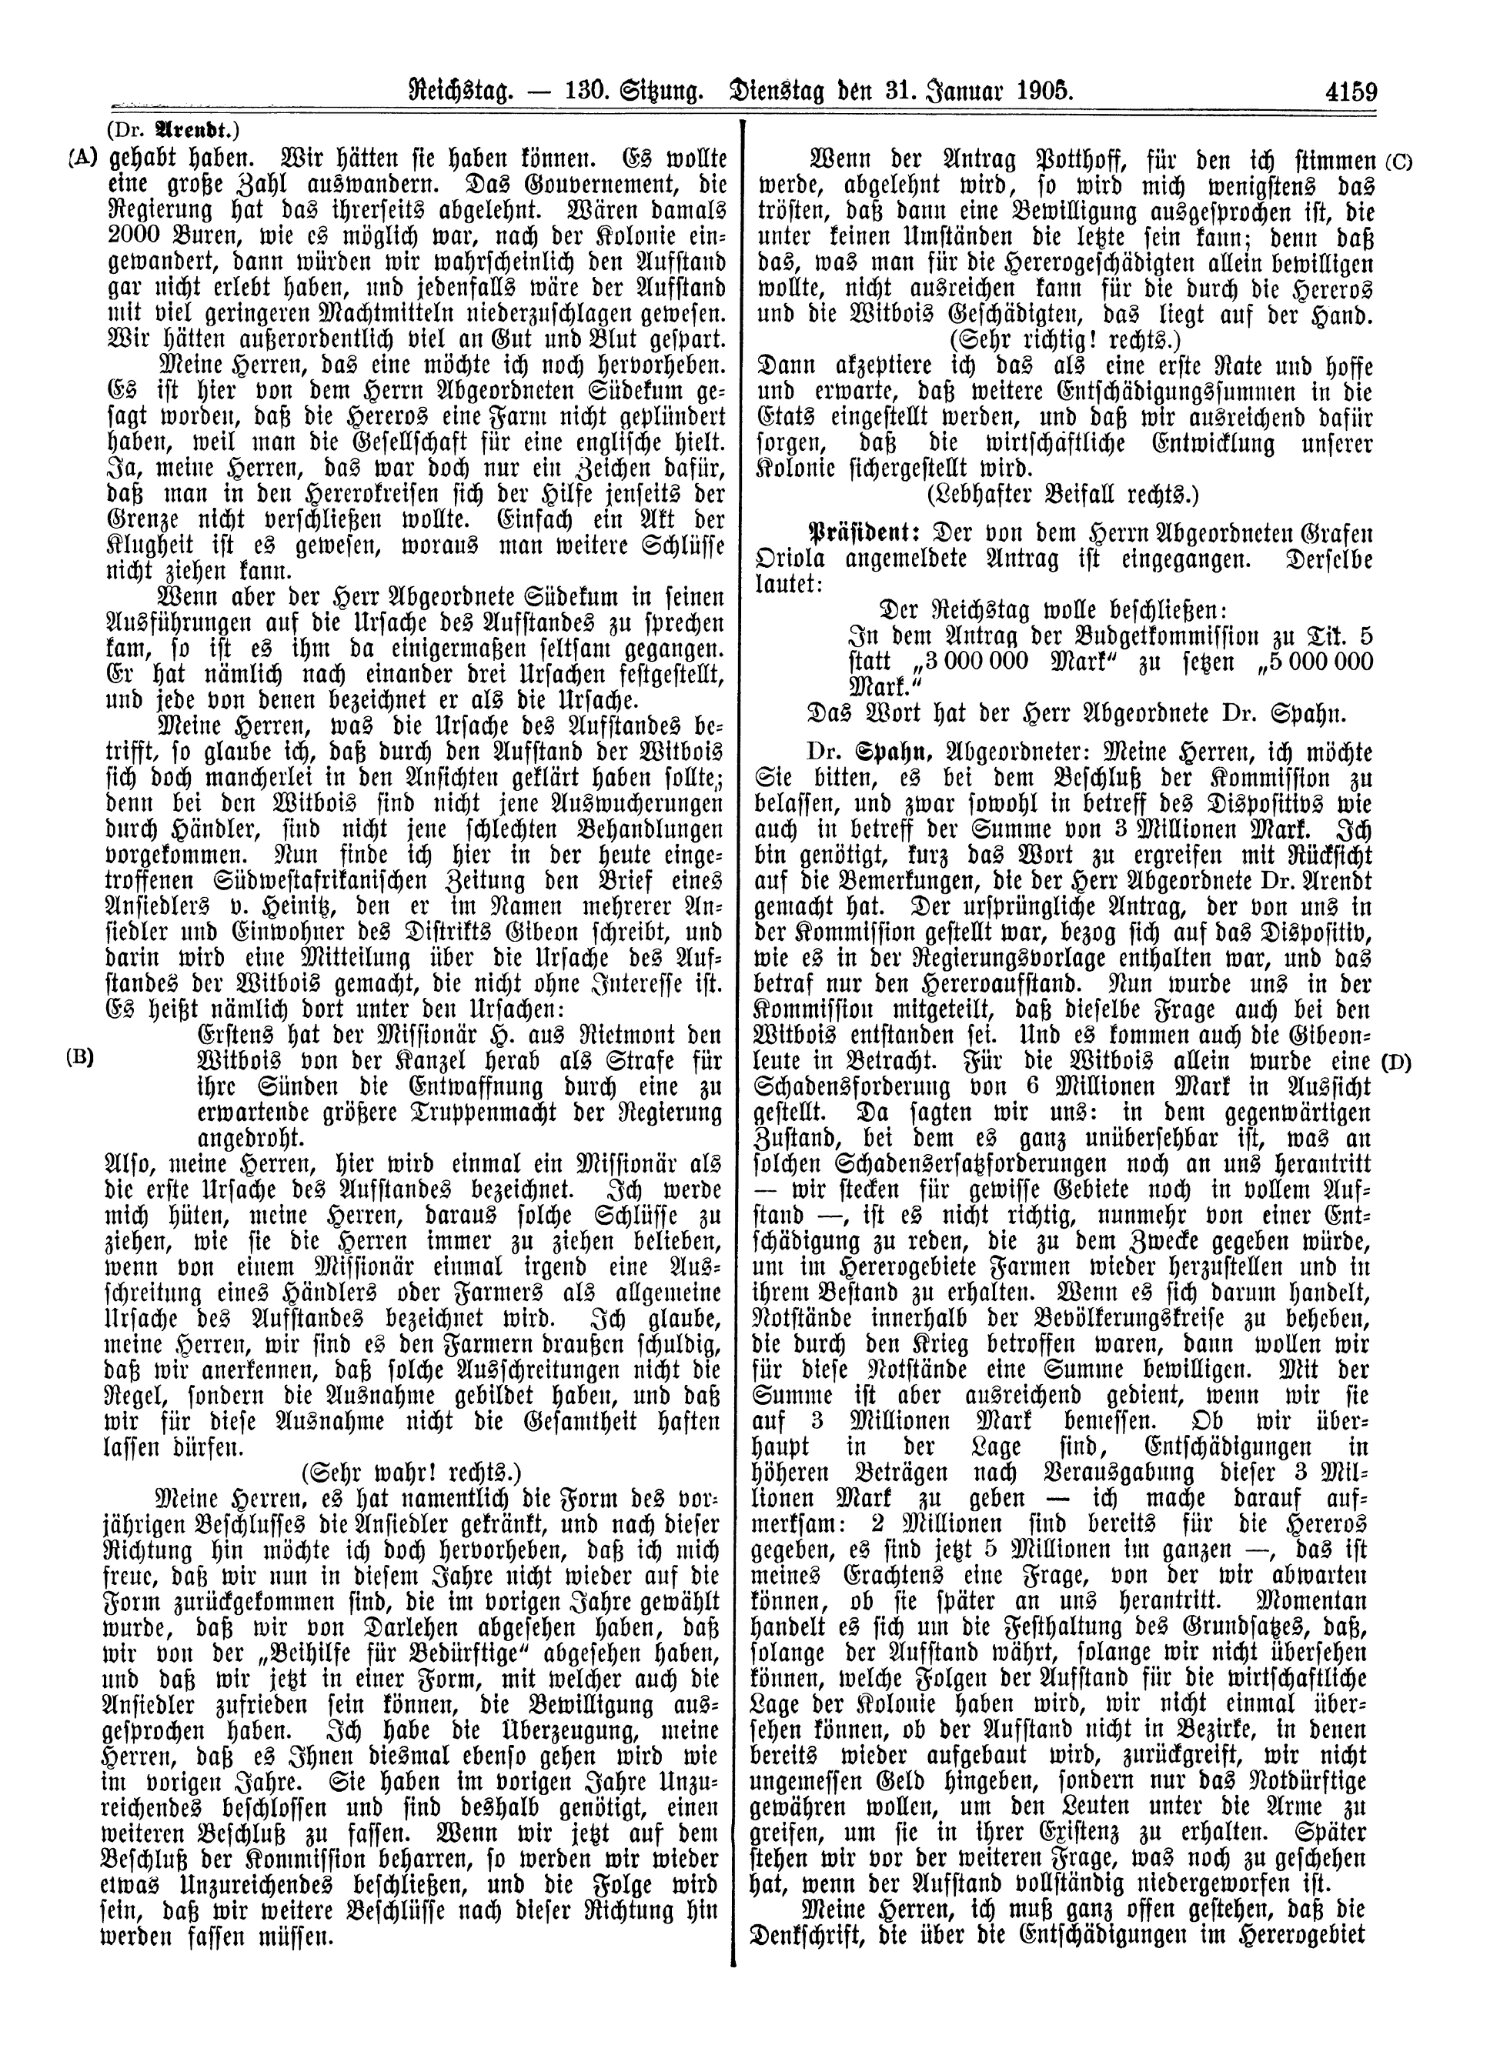 Scan of page 4159